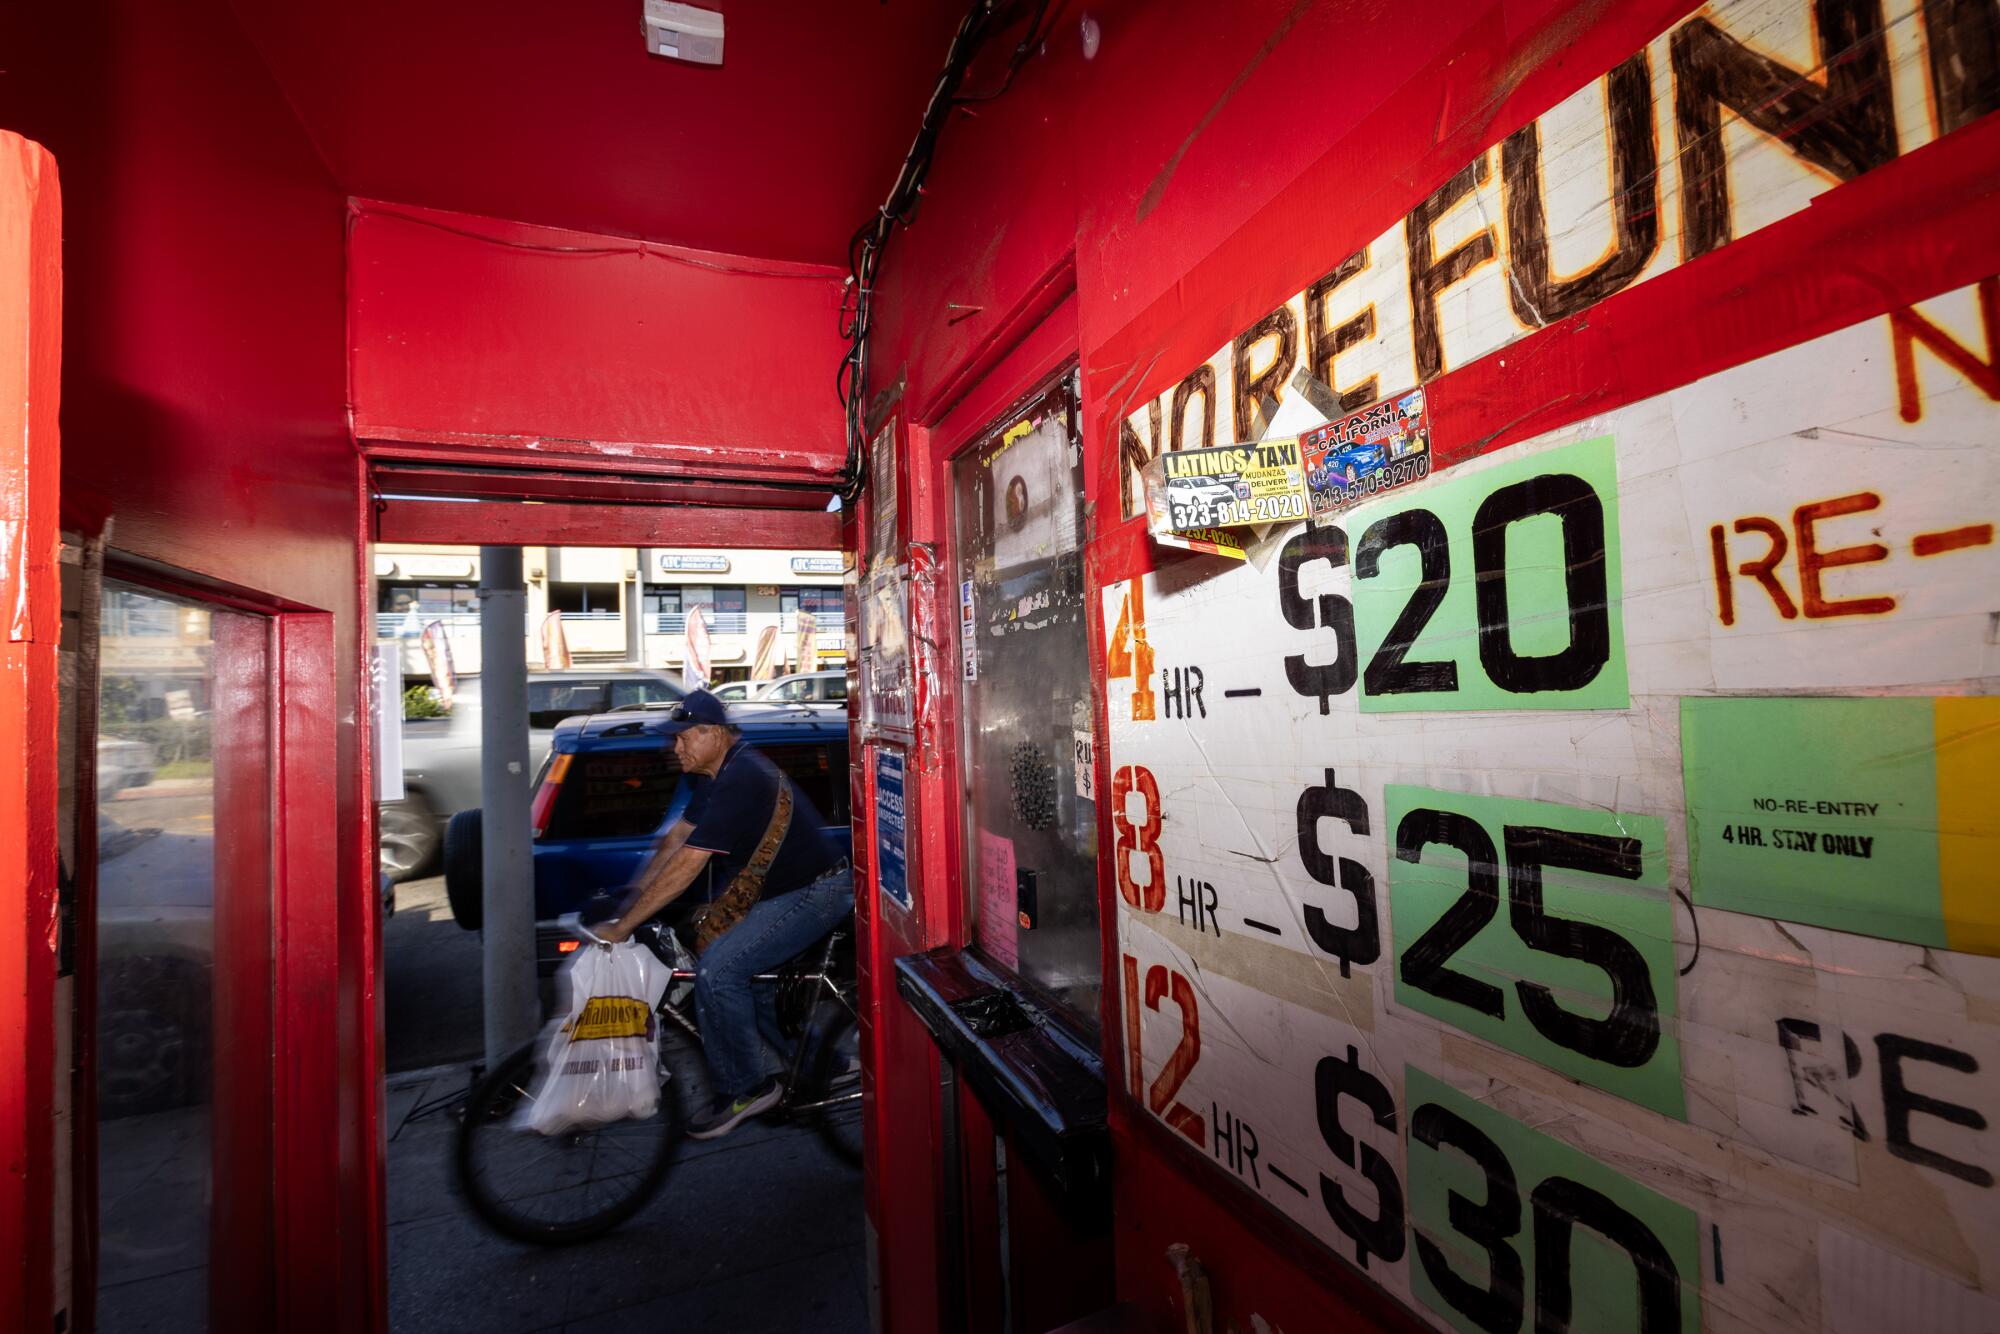 A cyclist rides past the entrance to the Tiki Theater on Santa Monica Boulevard.